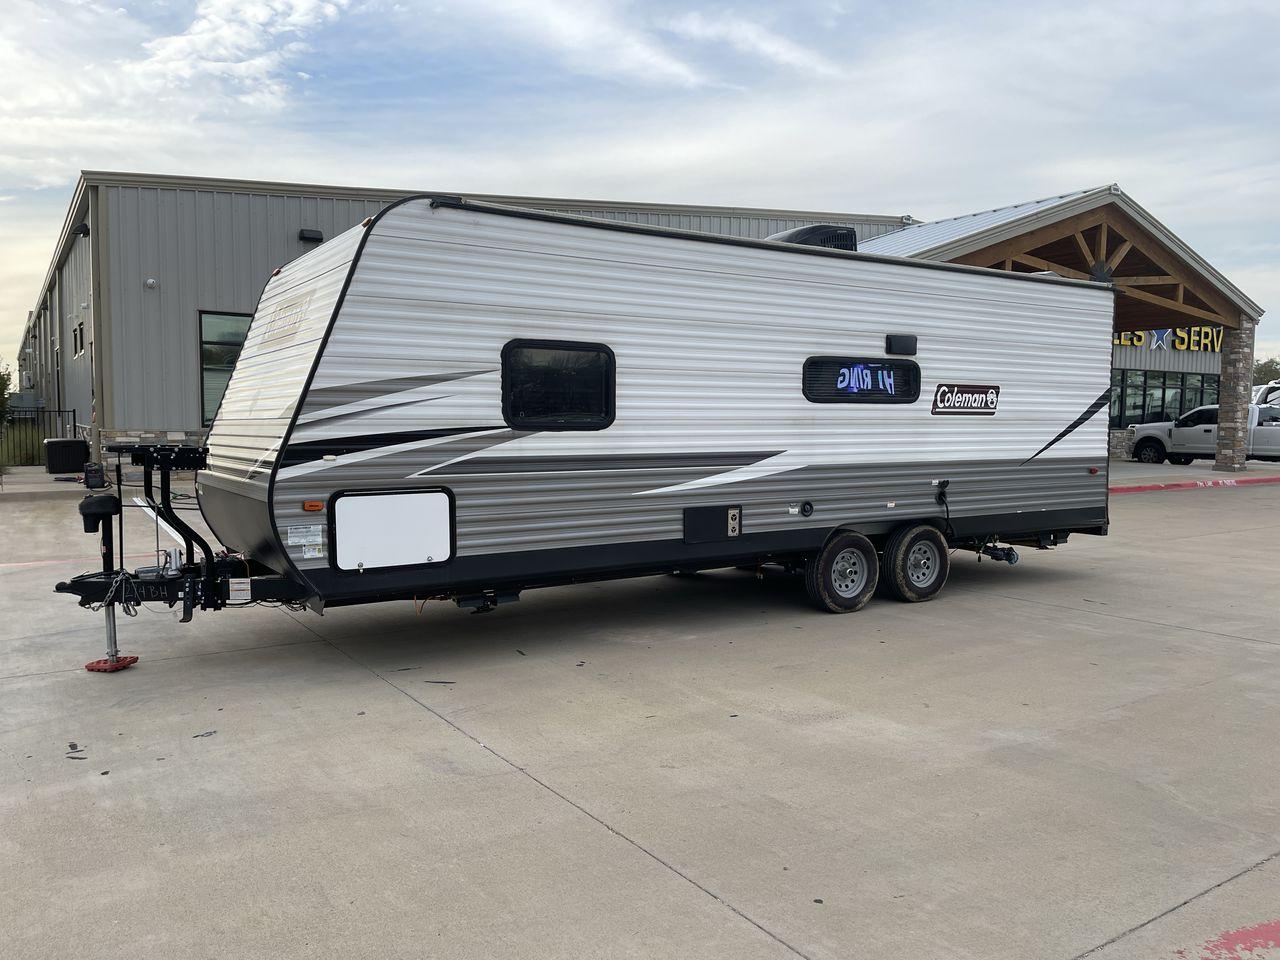 2021 WHITE KEYSTONE COLEMAN 274BH (4YDT27429MH) , Length: 28.58 ft. | Dry Weight: 4,789 lbs. | Slides: 0 transmission, located at 4319 N Main Street, Cleburne, TX, 76033, (817) 221-0660, 32.435829, -97.384178 - Set out on an adventure-filled, comfortable journey in the 2021 Keystone Coleman 274BH travel trailer. Families looking for a fun and memorable camping trip will love this well-designed and adaptable travel companion. The dimensions of this unit are 28.58 ft in length, 8 ft in width, and 10.33 ft - Photo #23